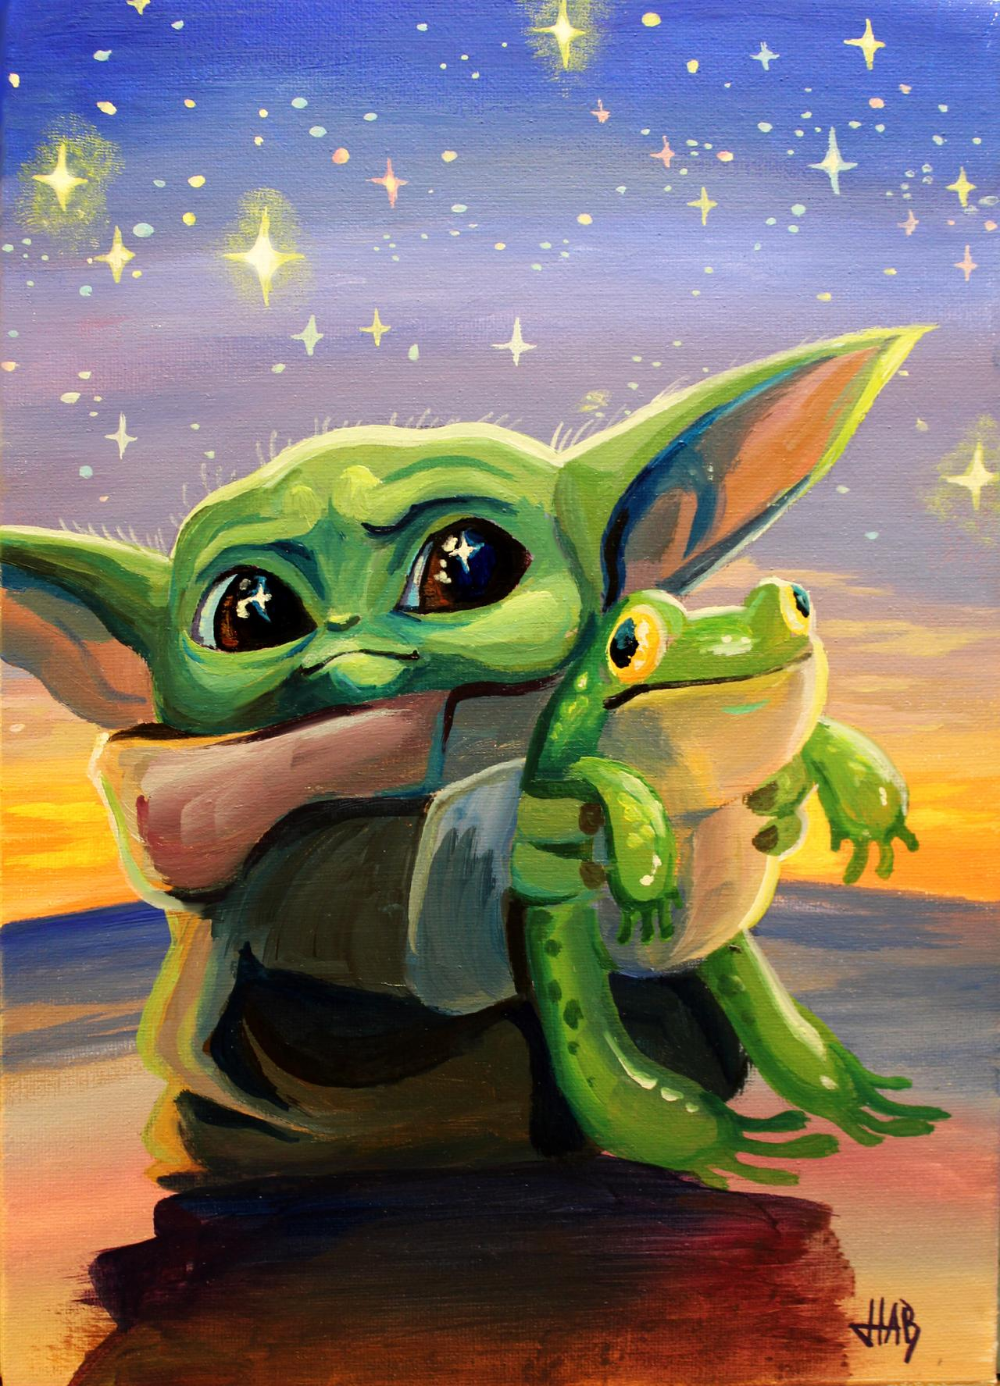 Baby Yoda loves Frog by Snowboardleopard in 2020